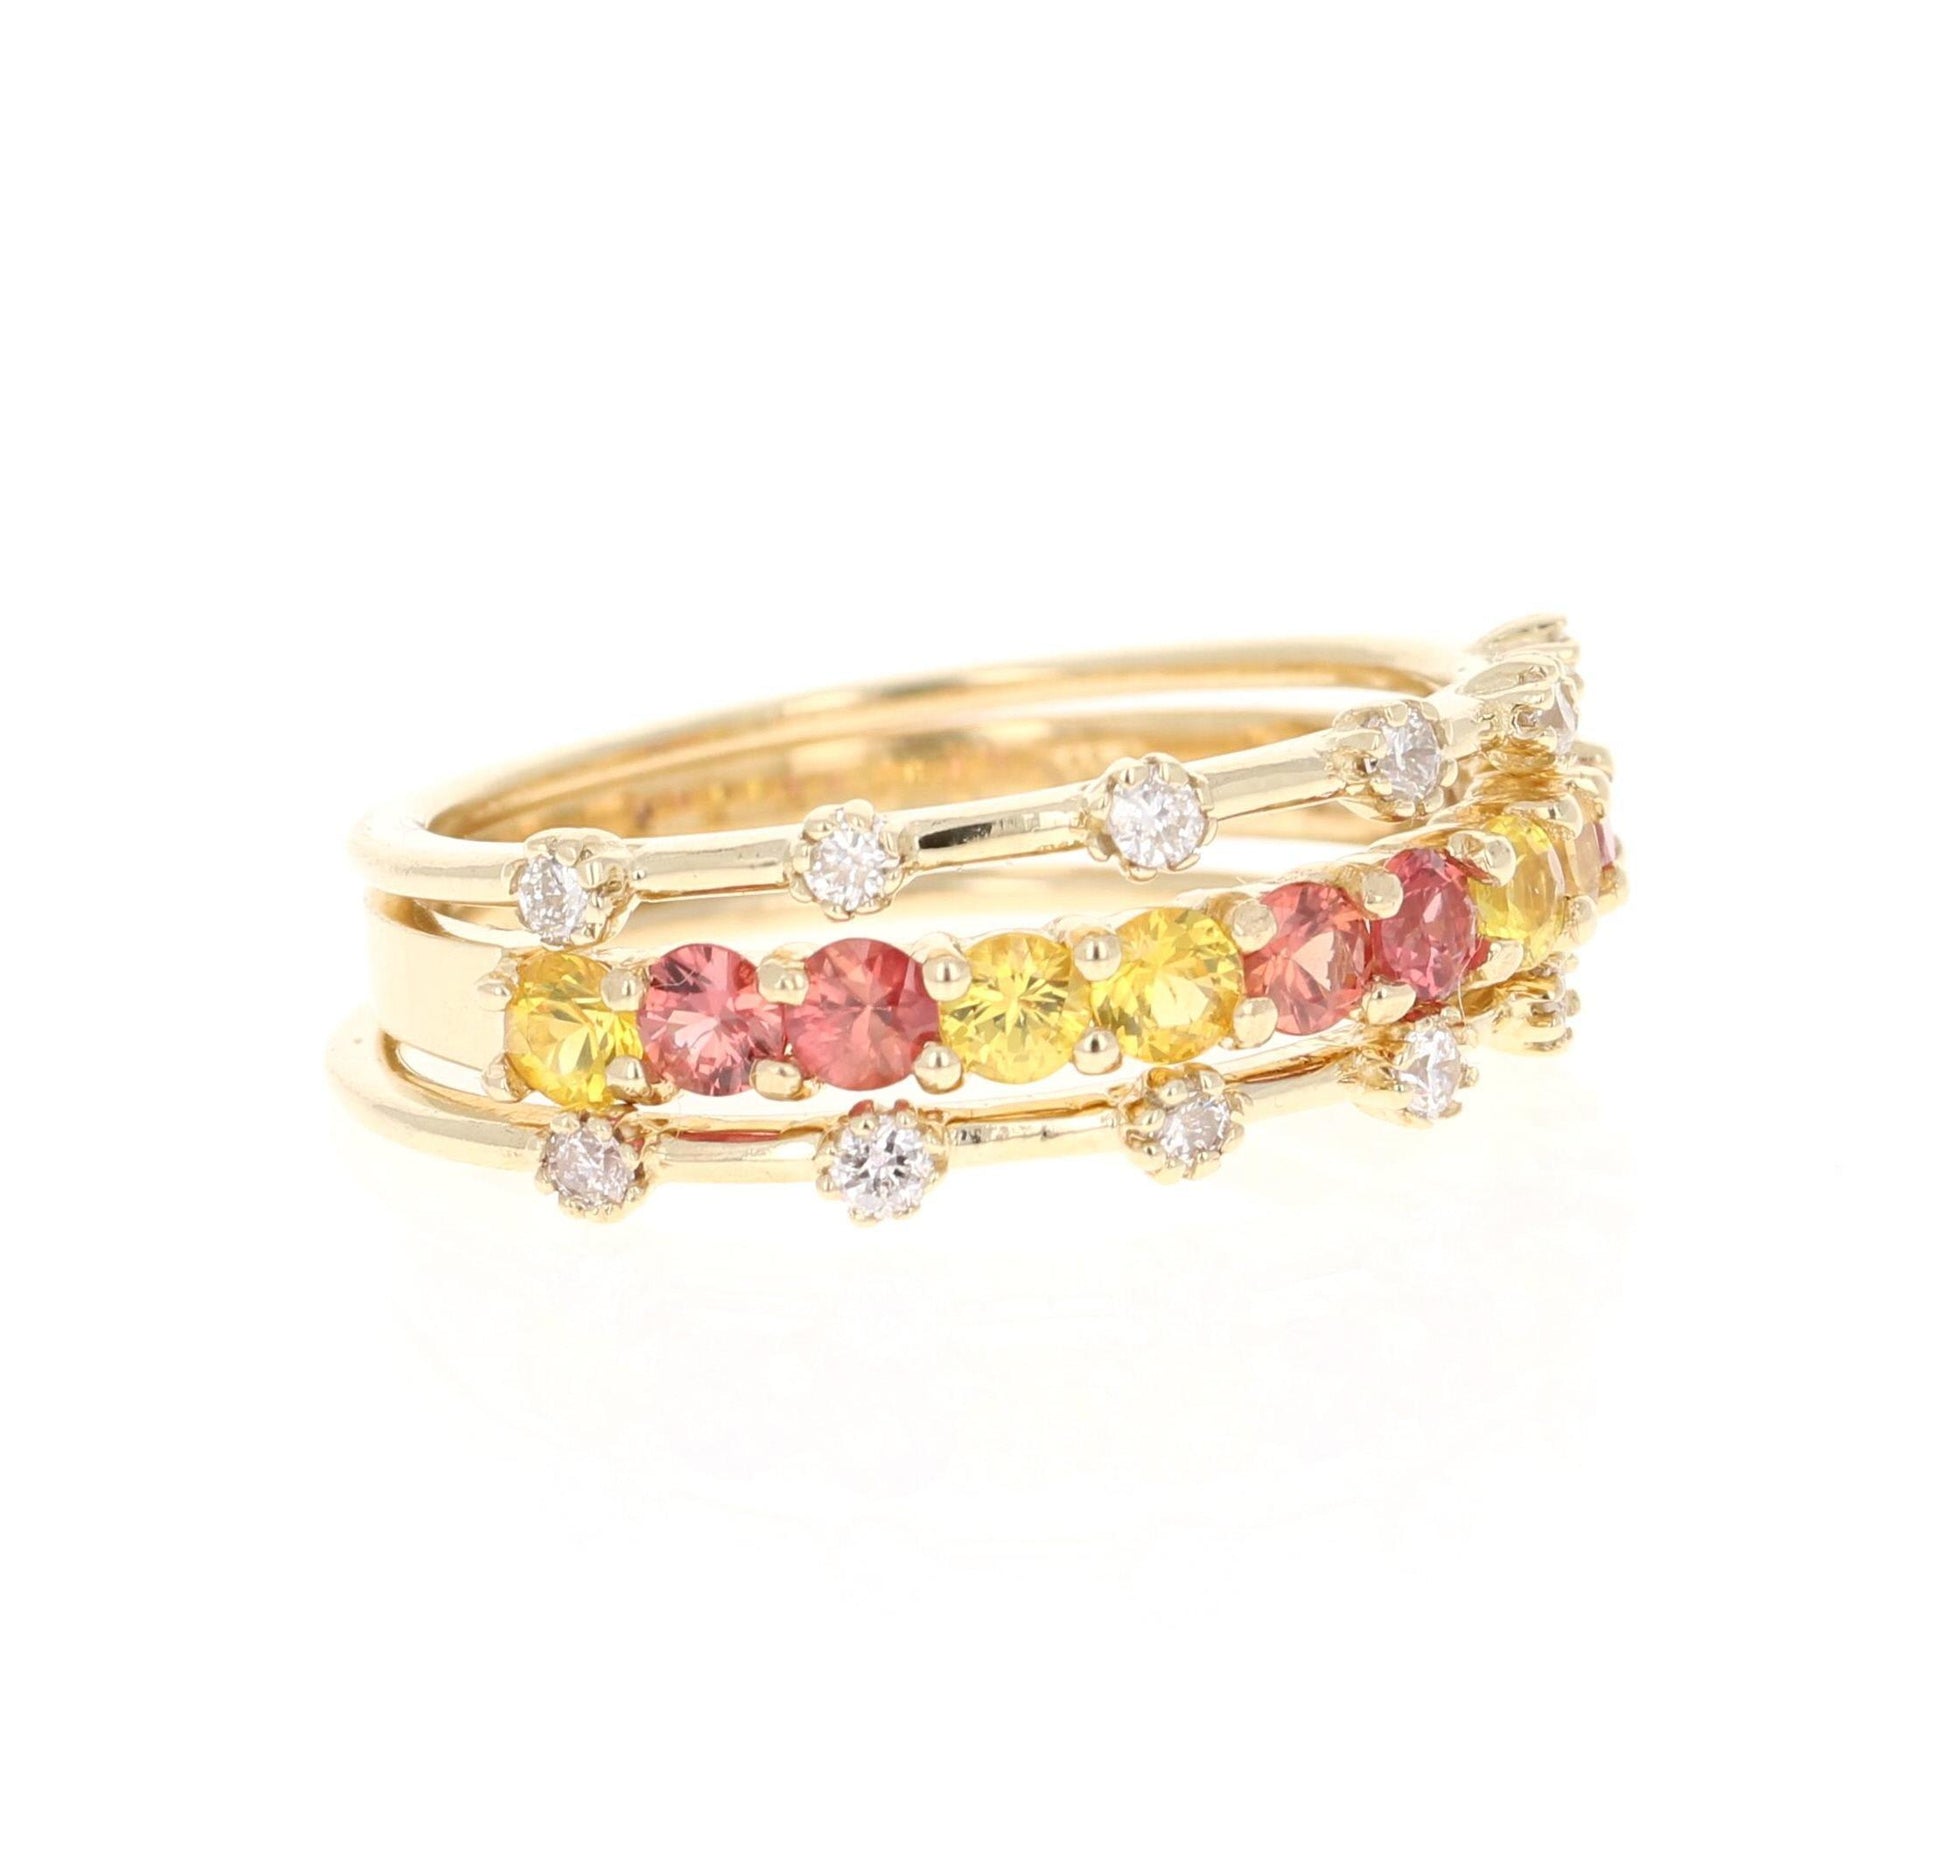 1.14 Carat Red and Yellow Sapphire Diamond 14 Karat Yellow Gold Stackable Bands